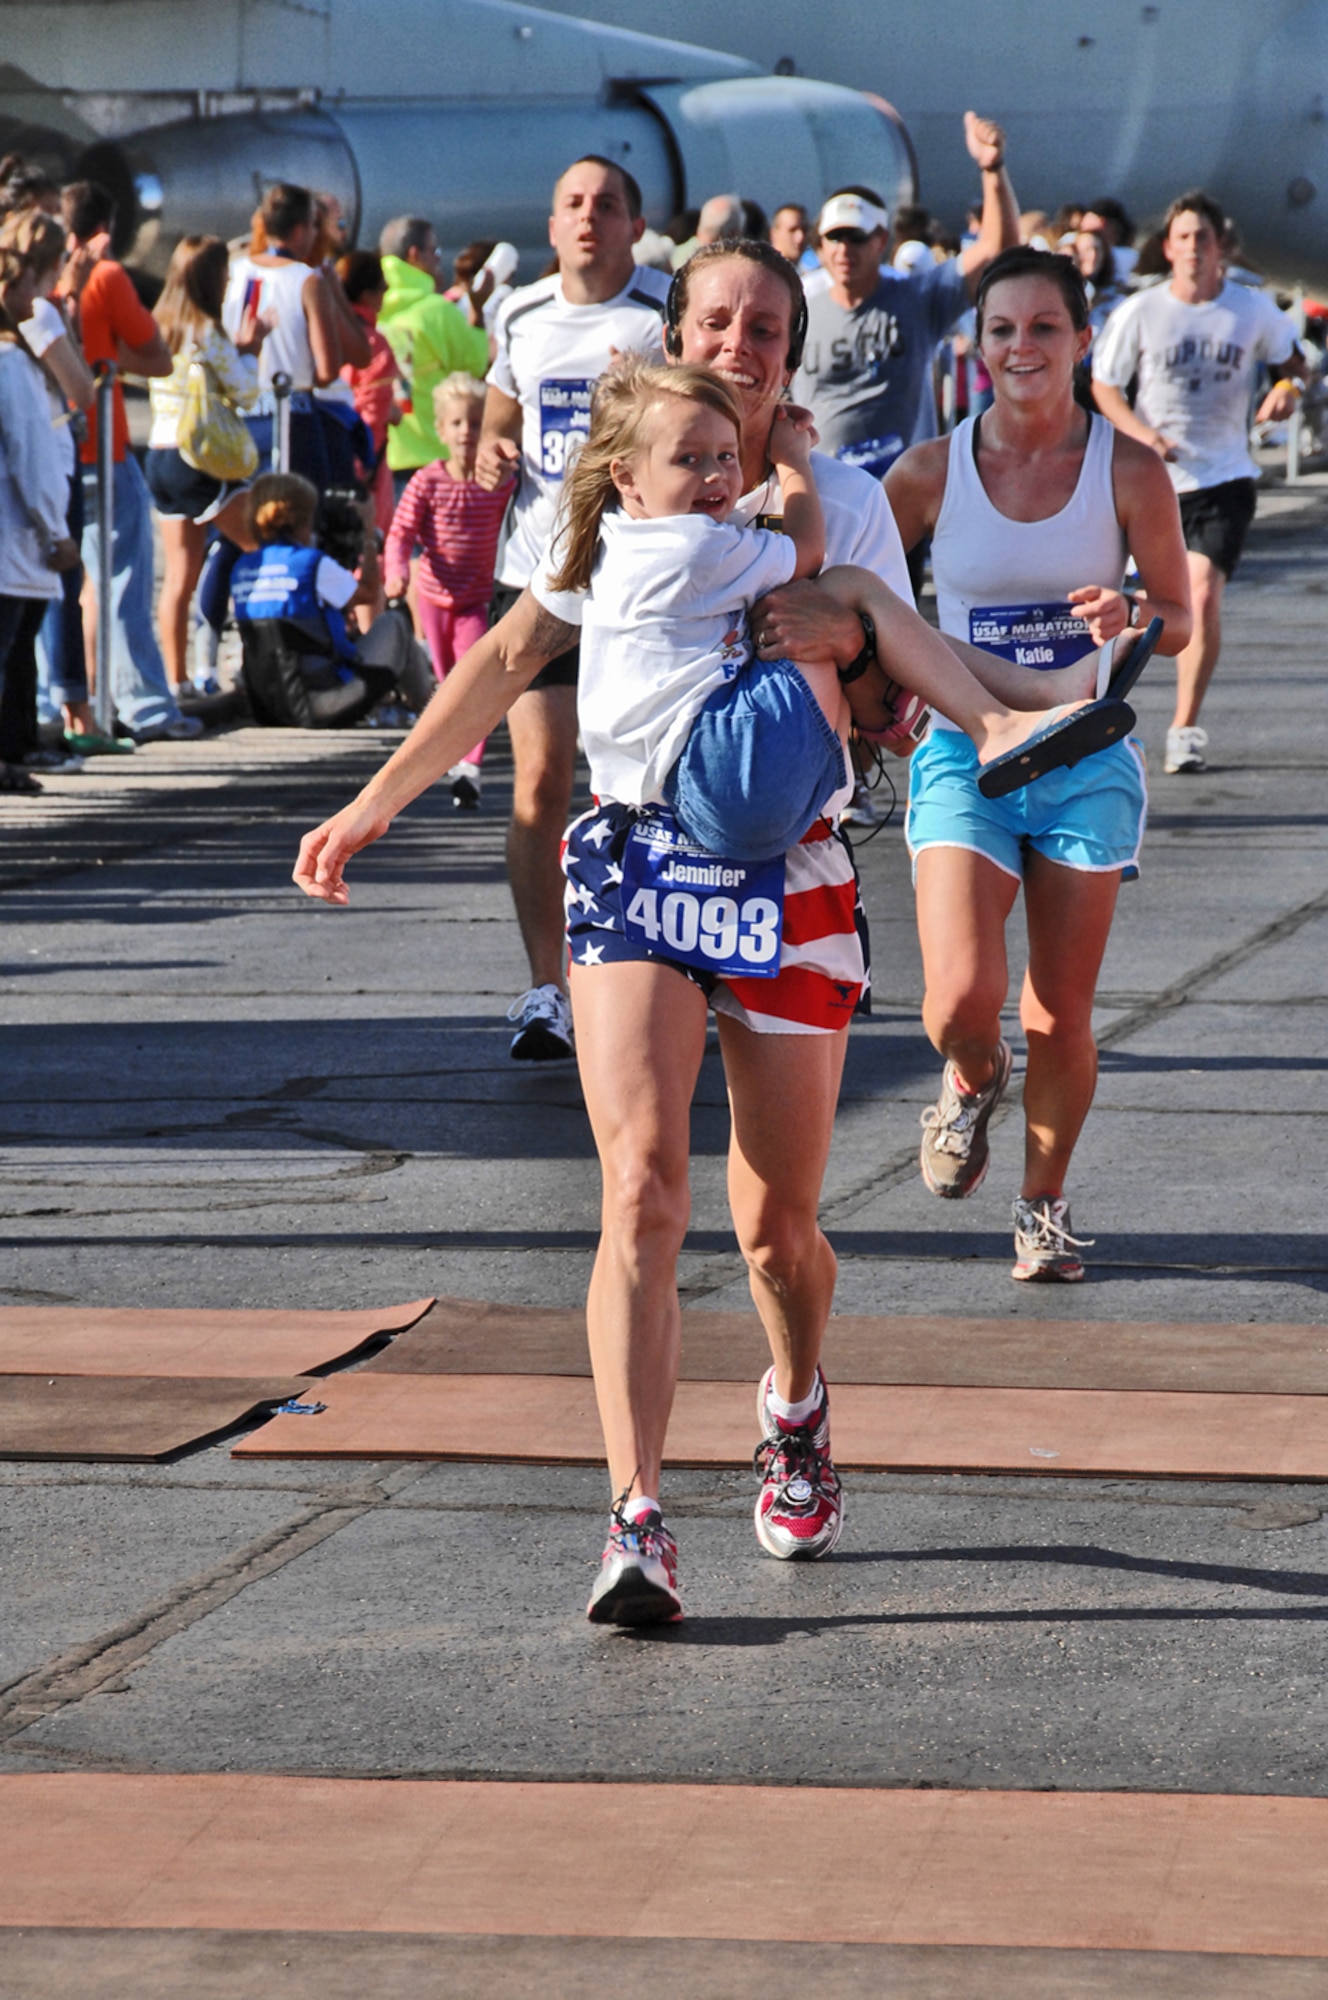 Jennifer Godsey crosses the finish line for the half marathon with her daughter Taylor clinging to become a part of the U.S. Air Force Marathon Sept. 19, 2009 at Wright-Patterson Air Force Base, Ohio. A record of nearly 10,000 runners participated. Ms. Godsey is a police officer with the City of Dayton.  (Air Force photo/Ben Strasser)
